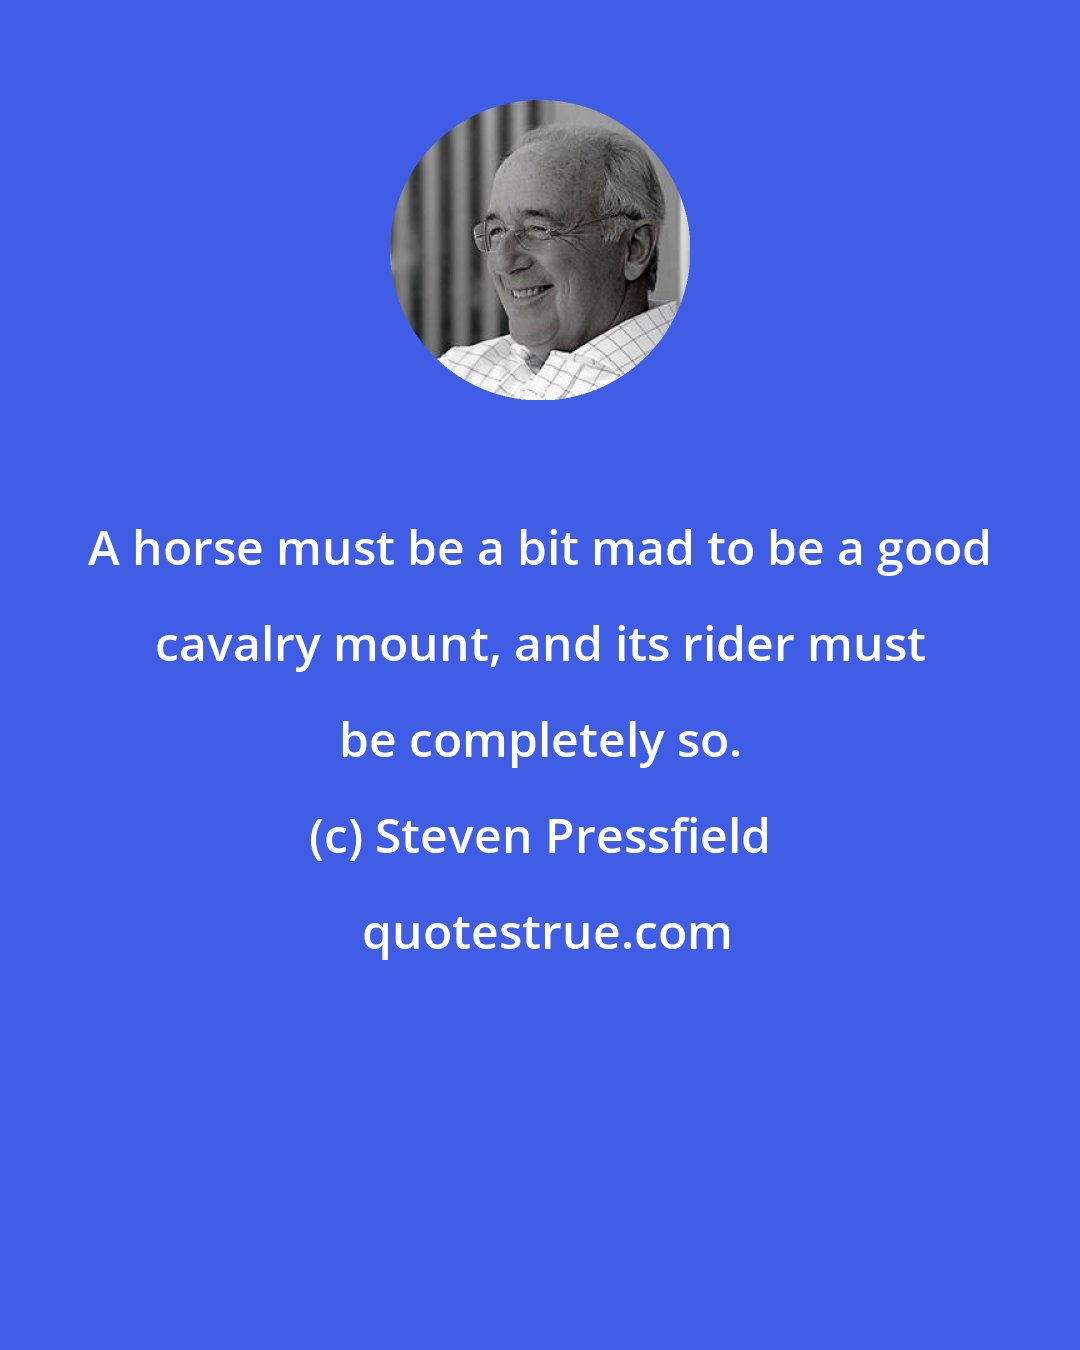 Steven Pressfield: A horse must be a bit mad to be a good cavalry mount, and its rider must be completely so.